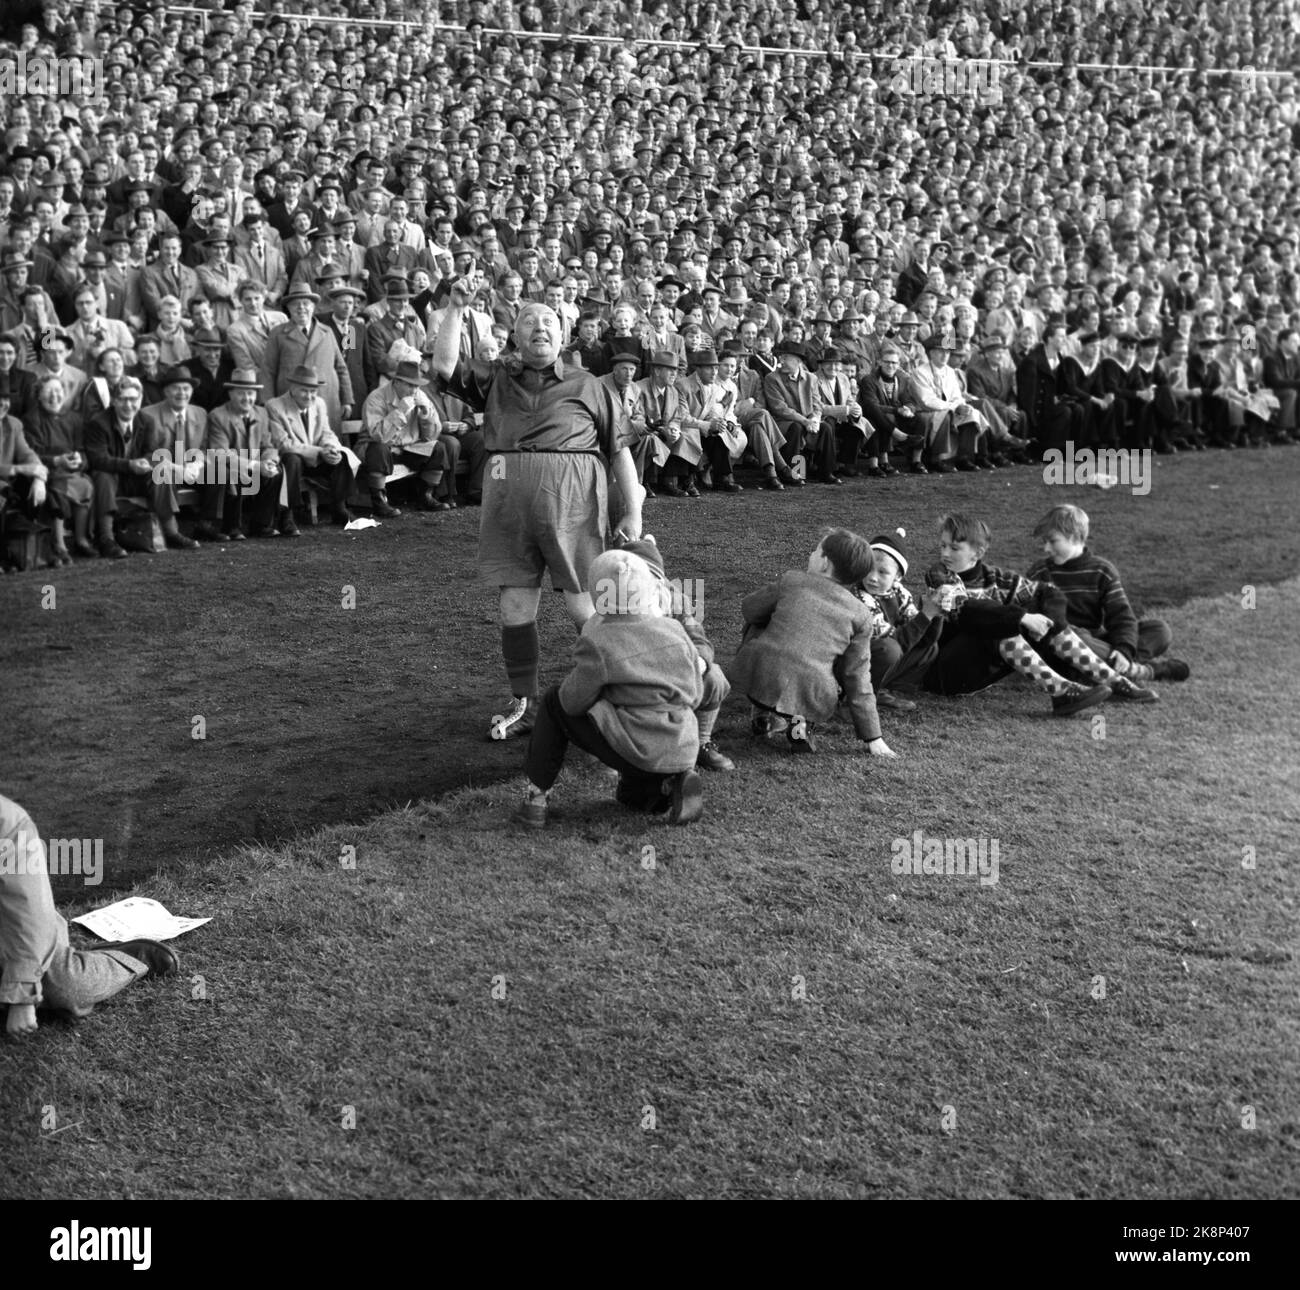 Oslo, 19561021. The cup final at Ullevaal Stadium. Larvik Turn - Skeid 1-2. Skeid supporter and revue artist Einar Rose waves a pennant. Young boys along the sidelines look strange at him. Photo: Current / NTB Stock Photo